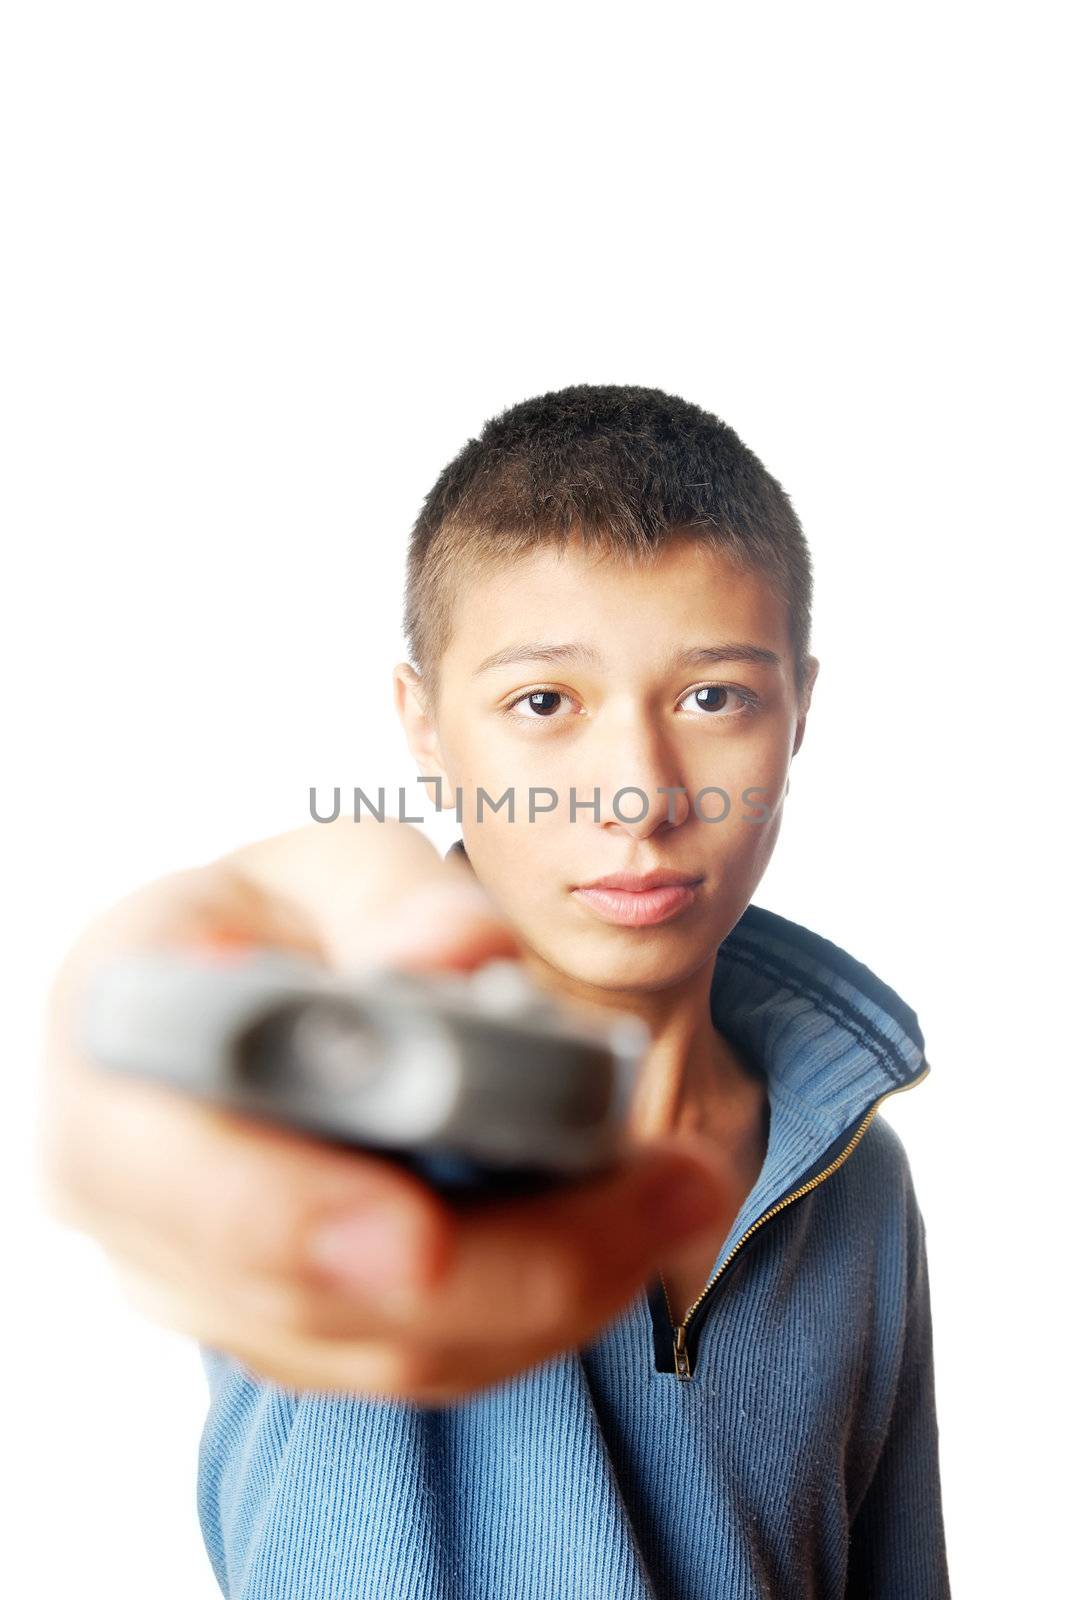 Studio photo of the boy with TV remote control device